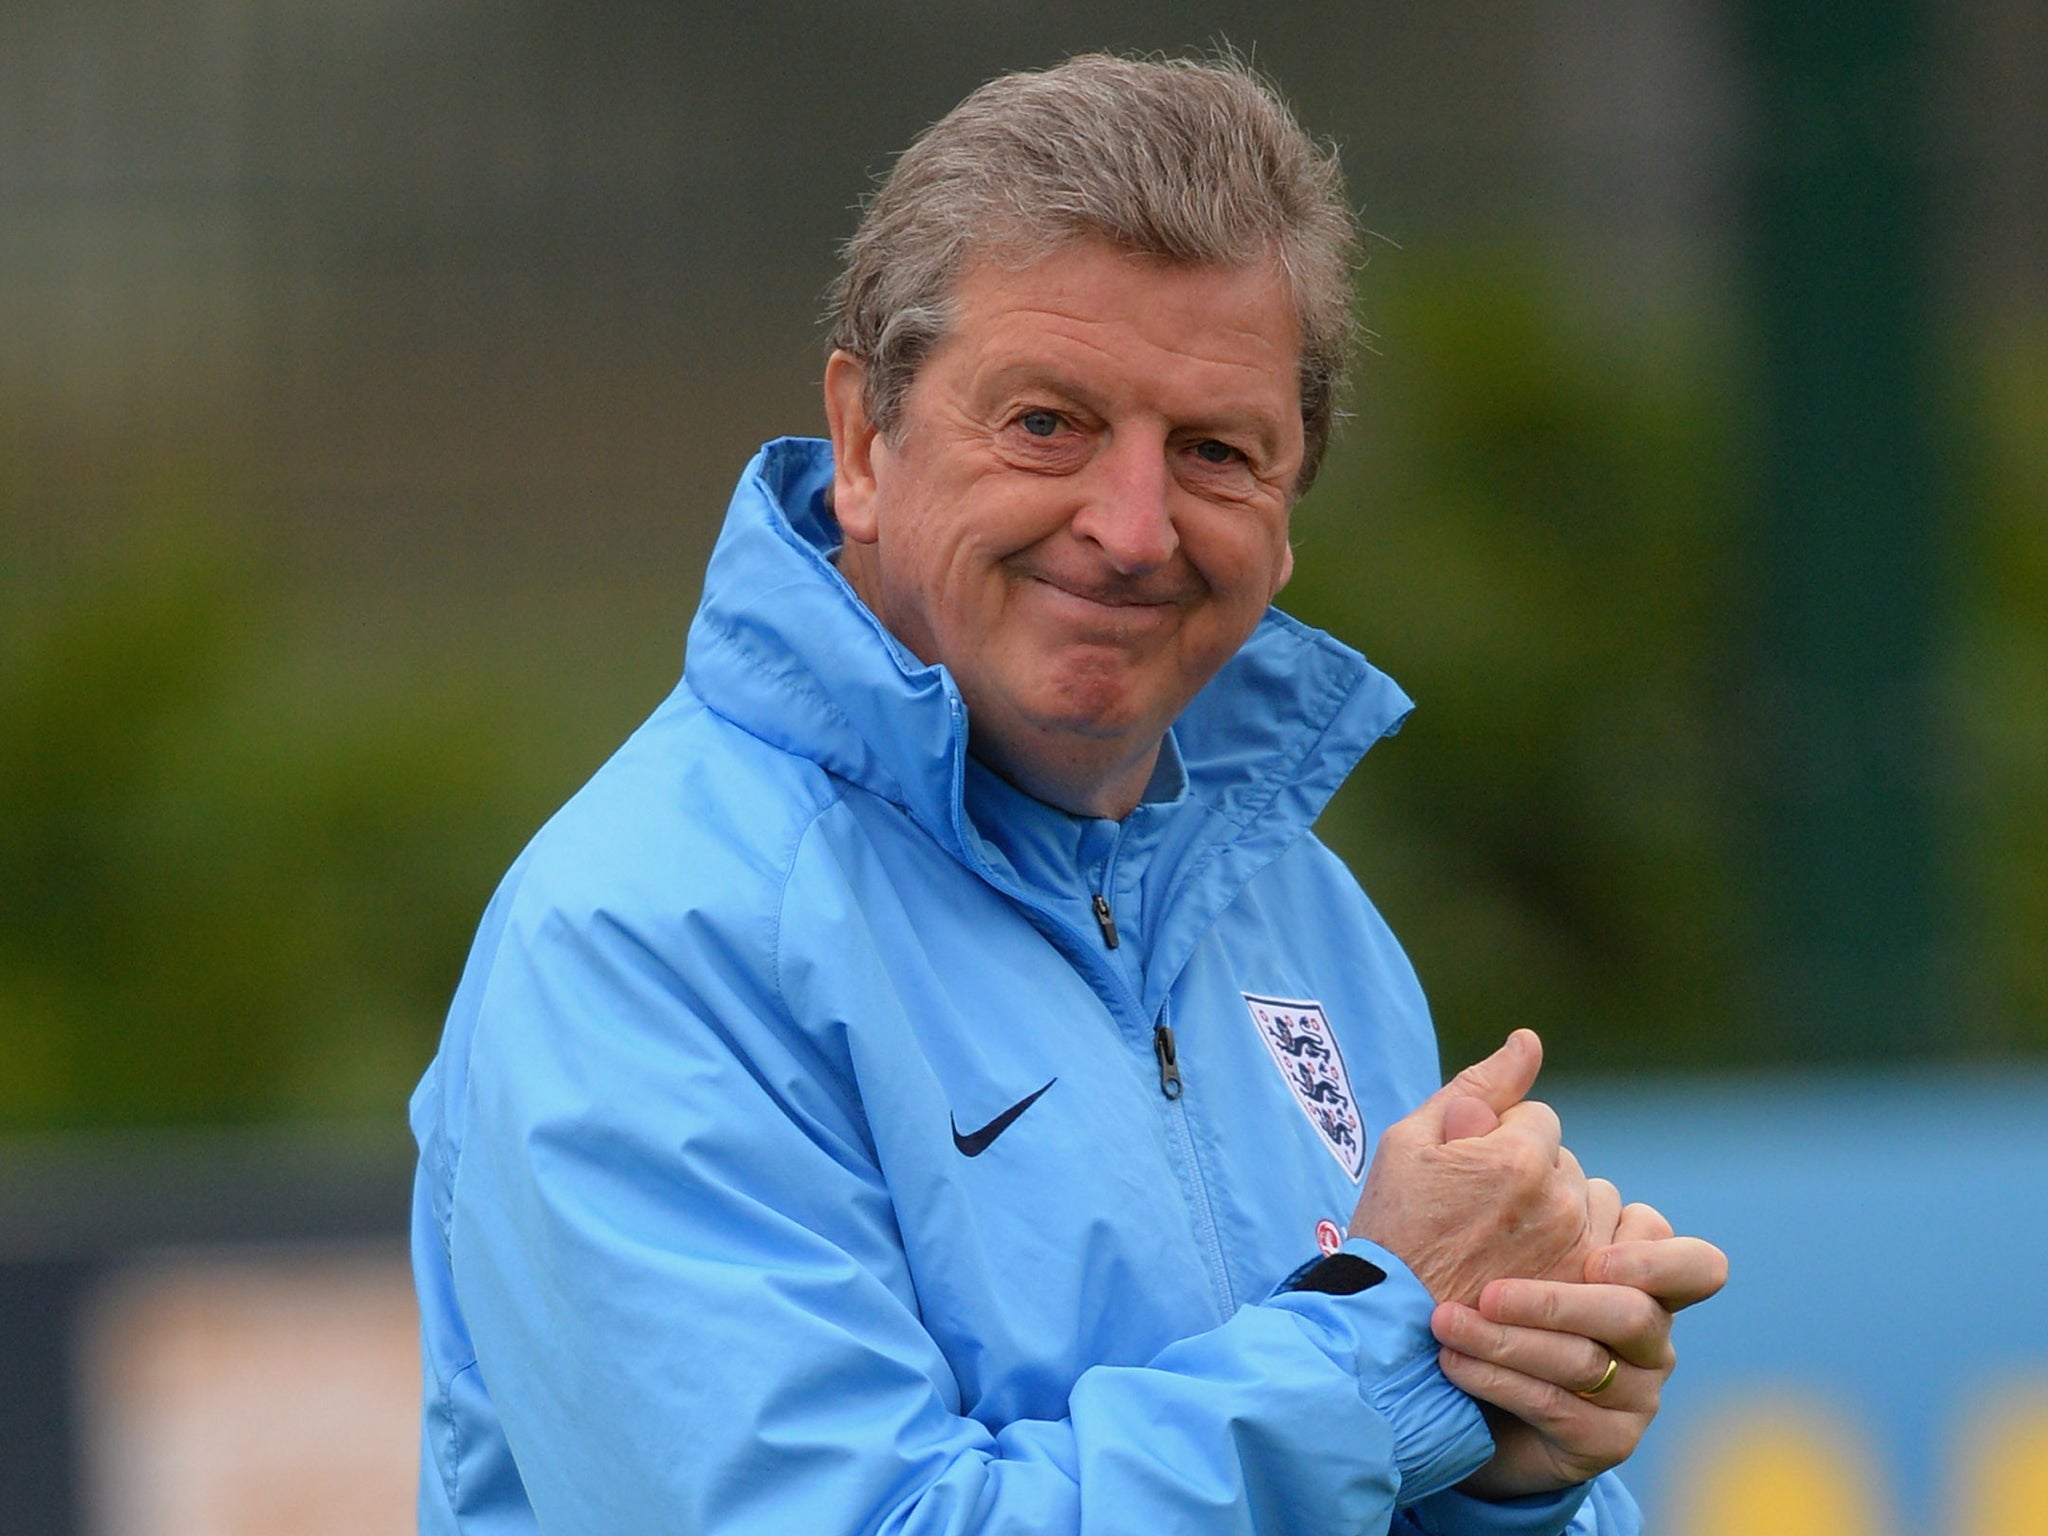 England manager Roy Hodgson admitted that he is more concerned about the location of the World Cup fixtures rather than the opposition